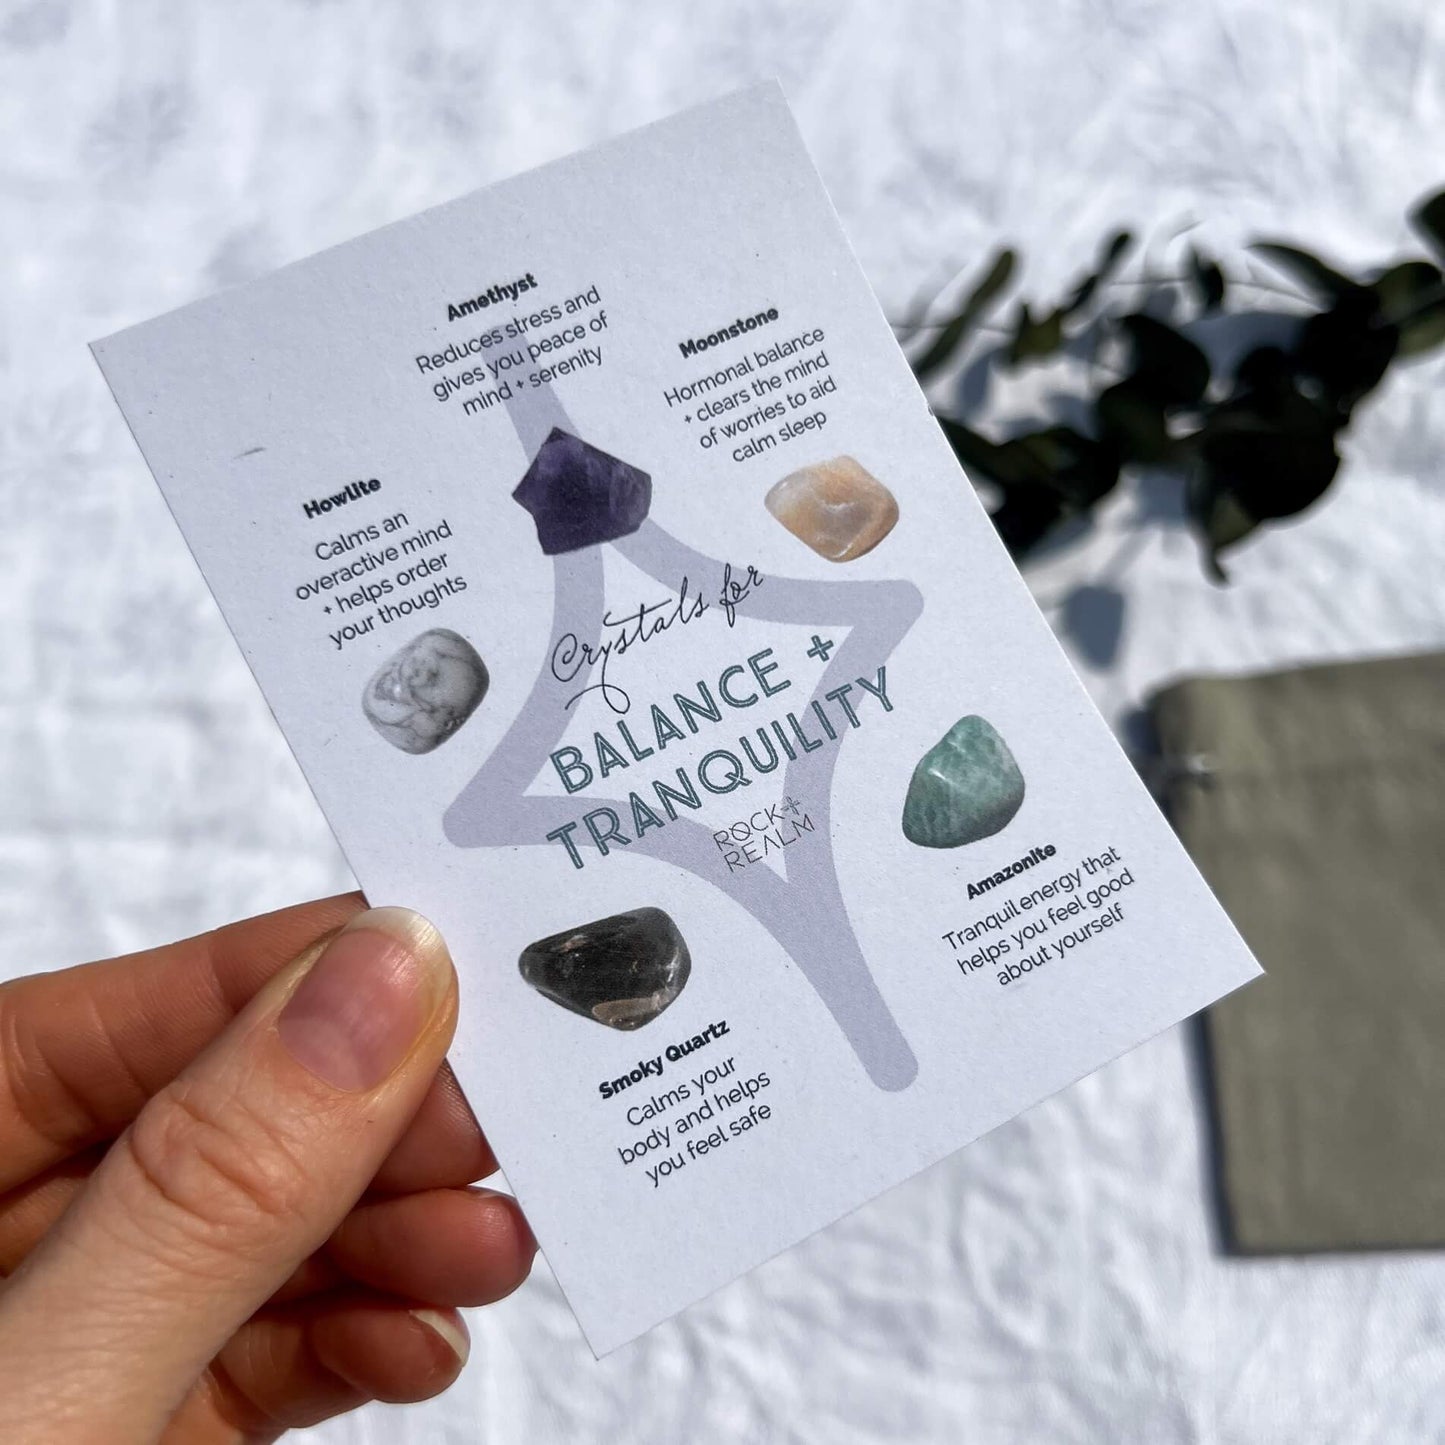 Balance and tranquility crystal properties information card